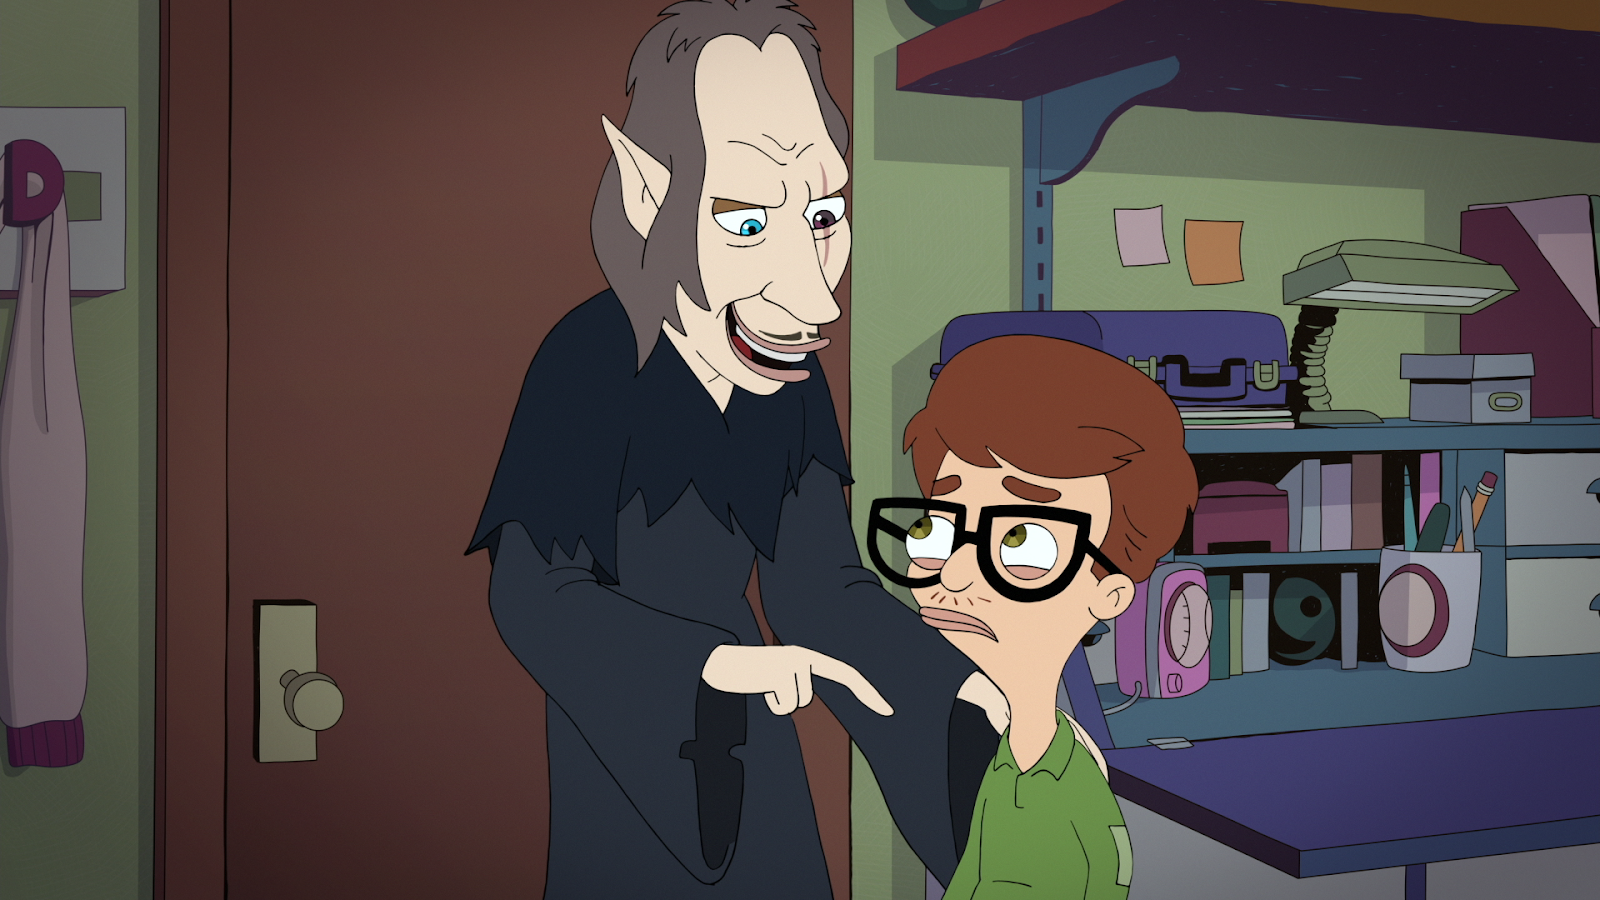 Big Mouth - Season 2 - Advance Preview: "Absolutely worth your time"